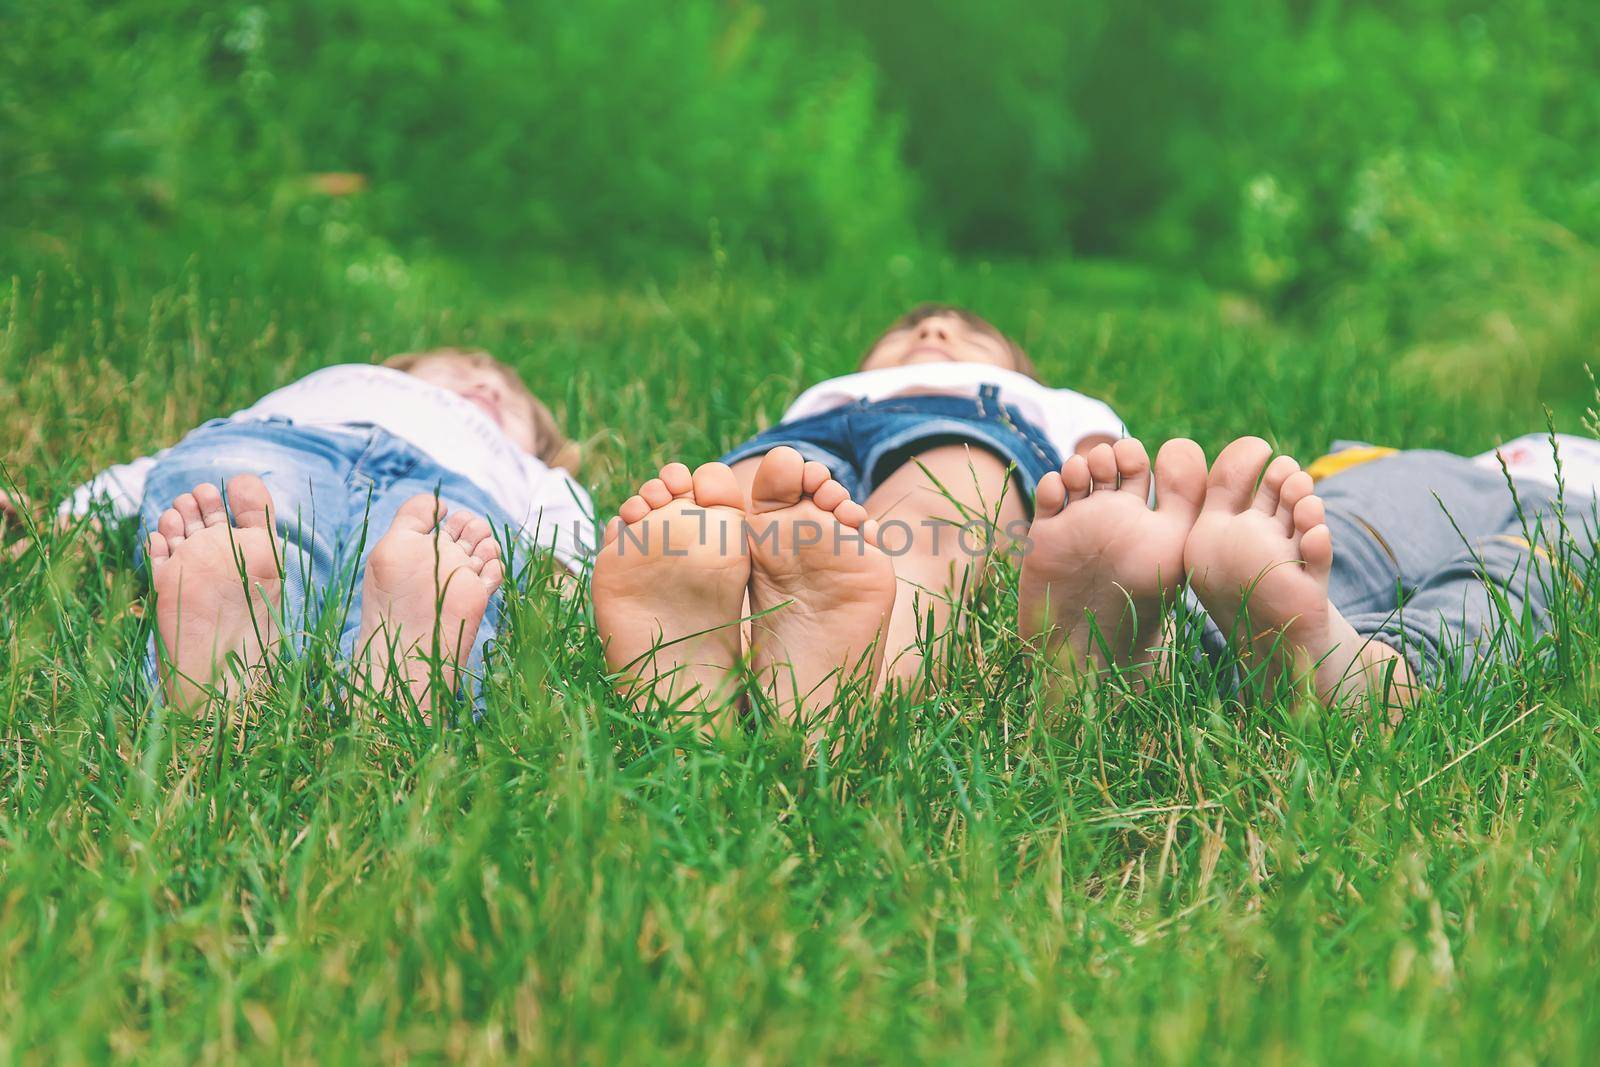 Children's feet on the green grass in the park. Selective focus. nature.